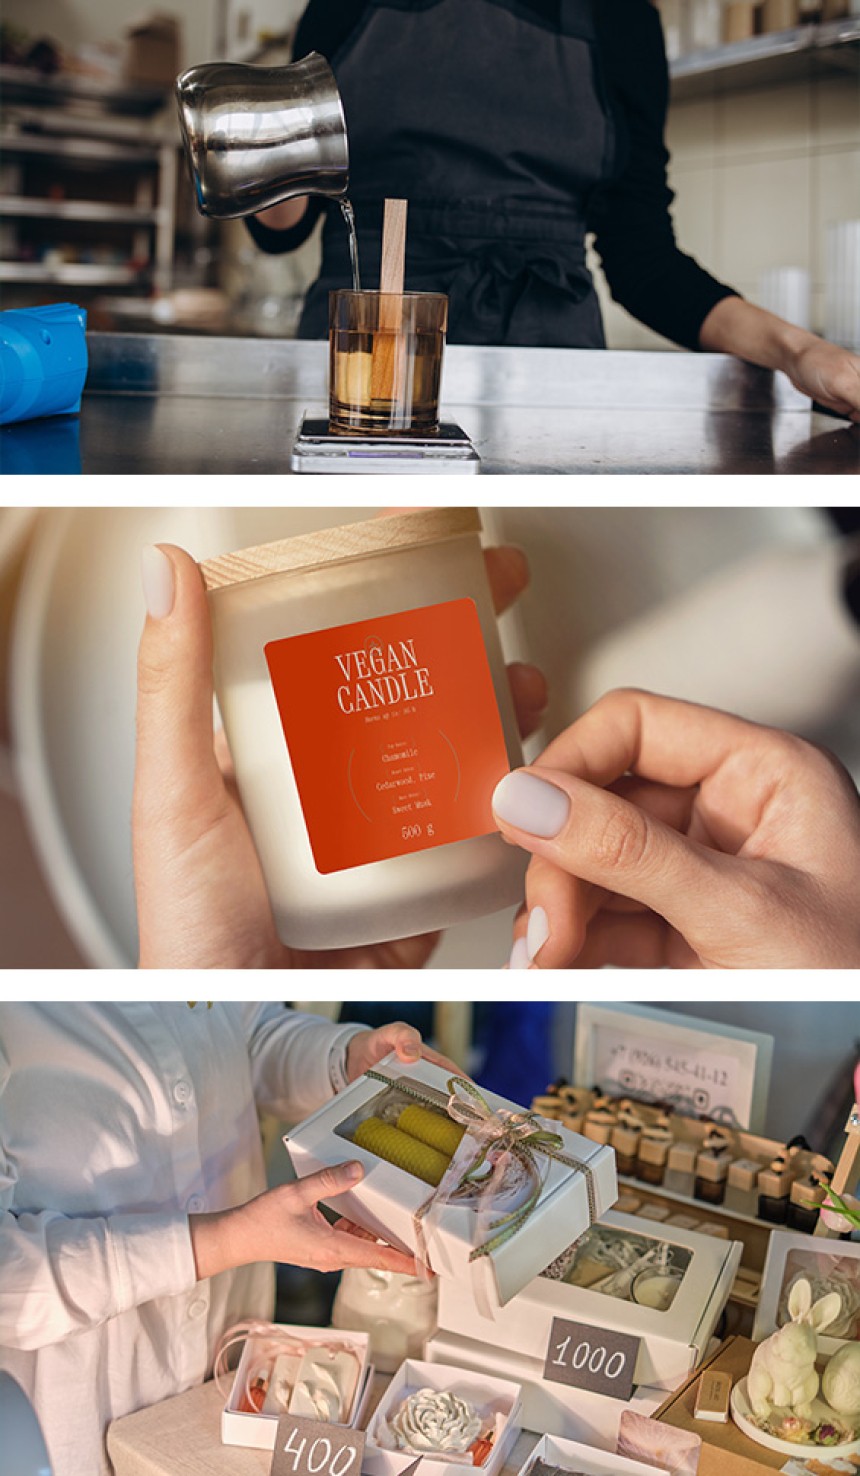 Image 1: Woman pouring candle wax into a jar. Image 2: Hands applying label onto candle jar. Image 3: Woman at a marketplace handing out a gift box of candles